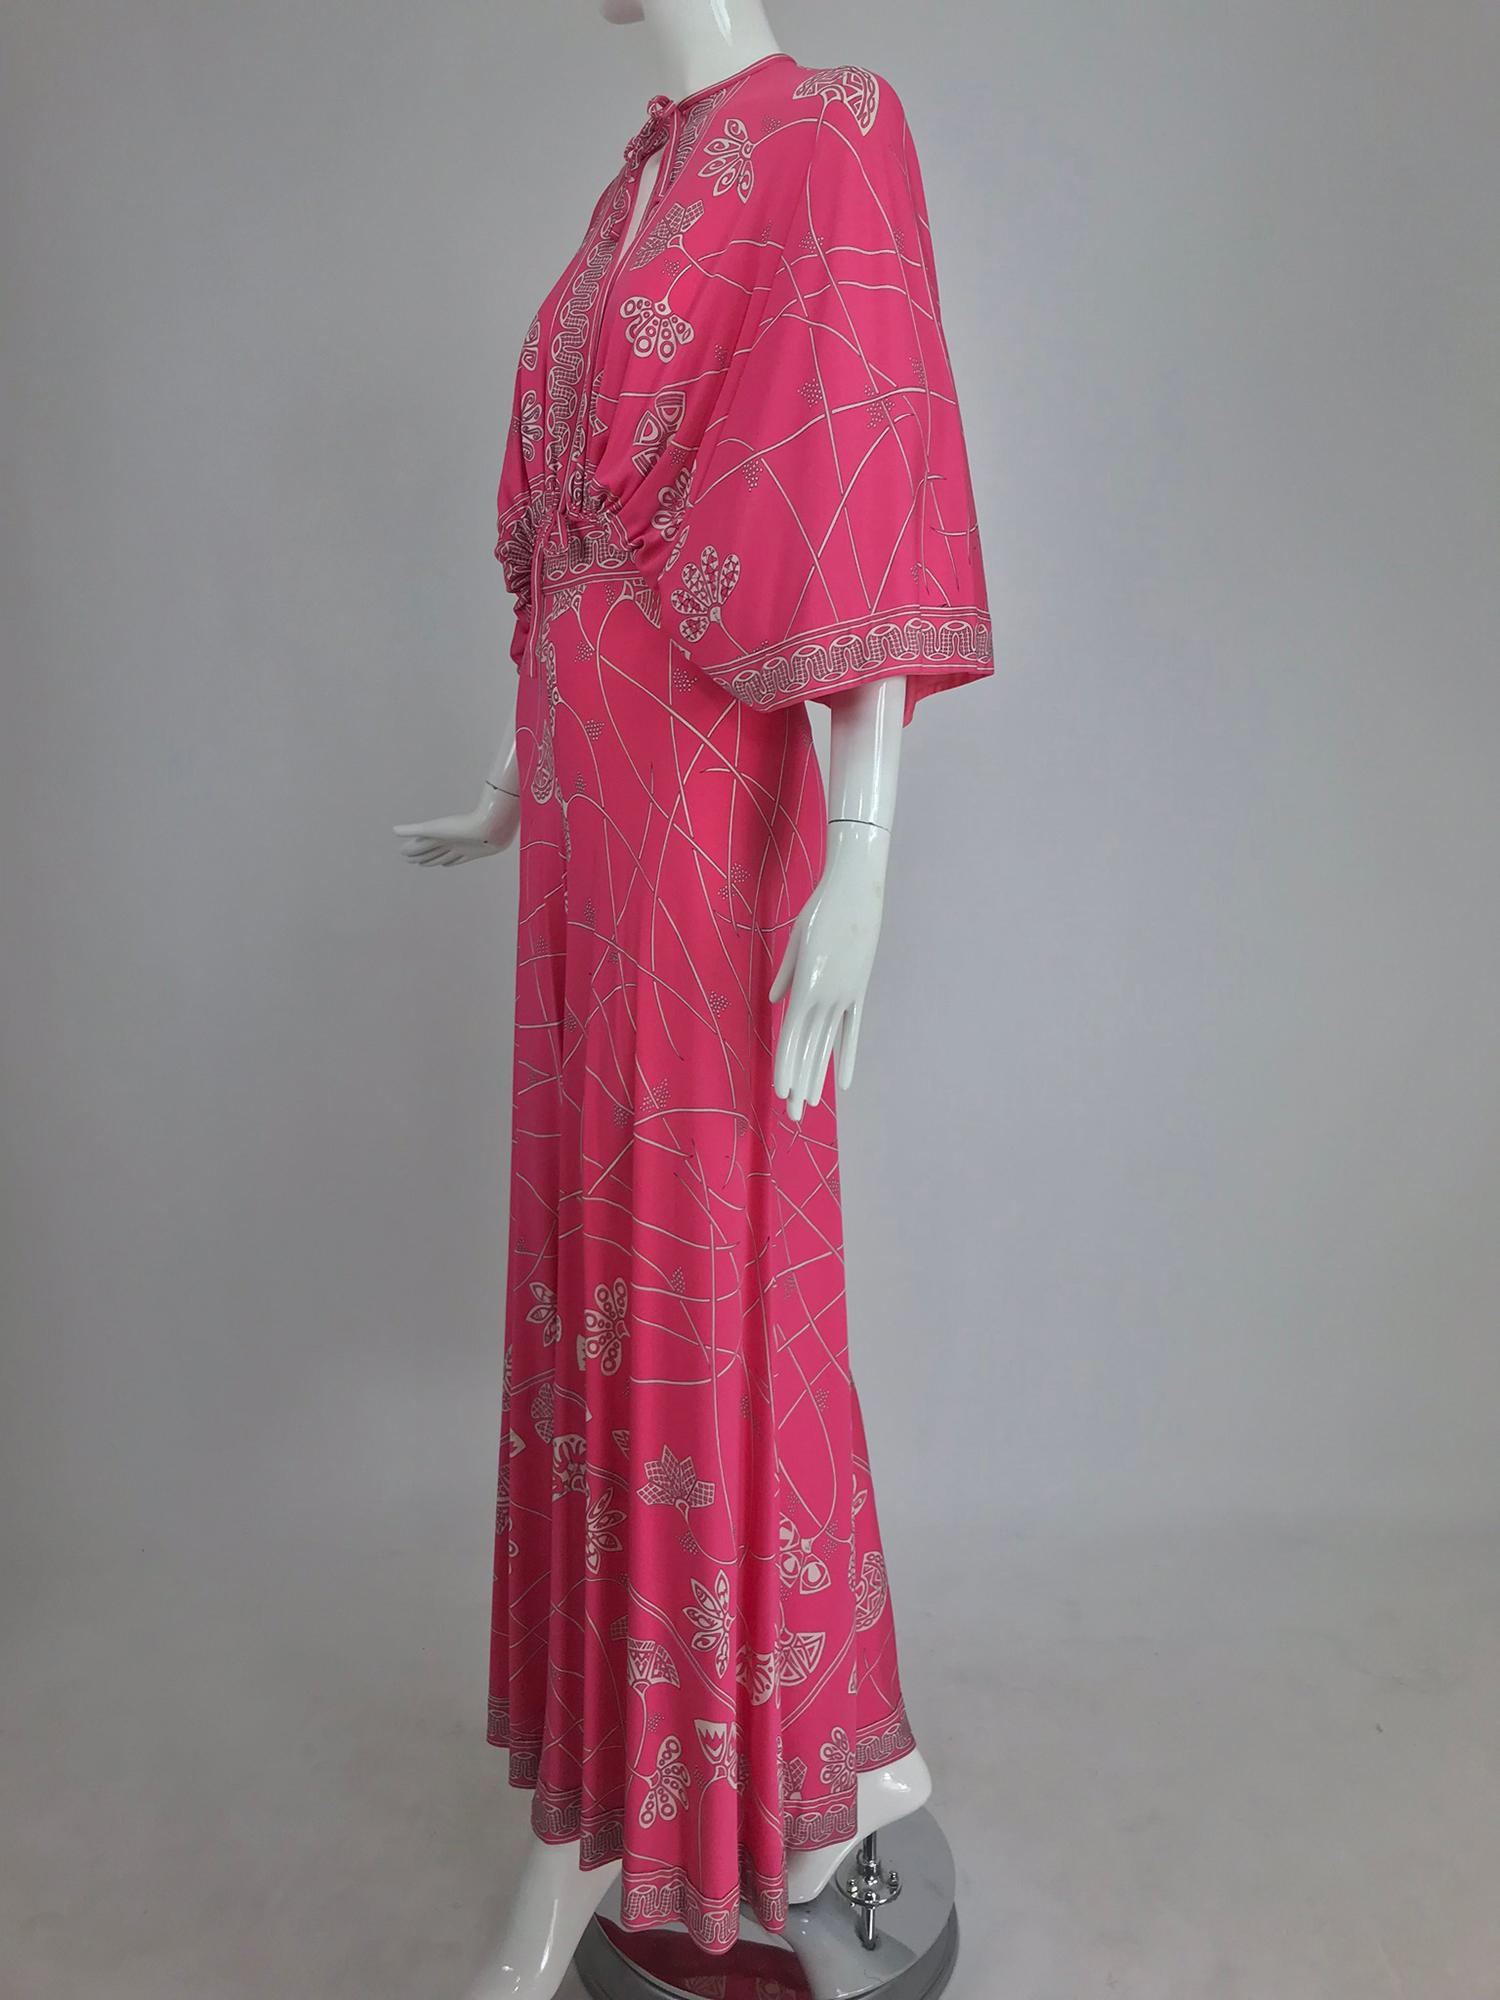 Emilio Pucci flamingo pink silk jersey plunge top and palazzo trouser from the 1970s. This amazing and rare Pucci set has a bat wing, full sleeve top that is open at the center front and back from the neck to the waist, the waist has cased elastic